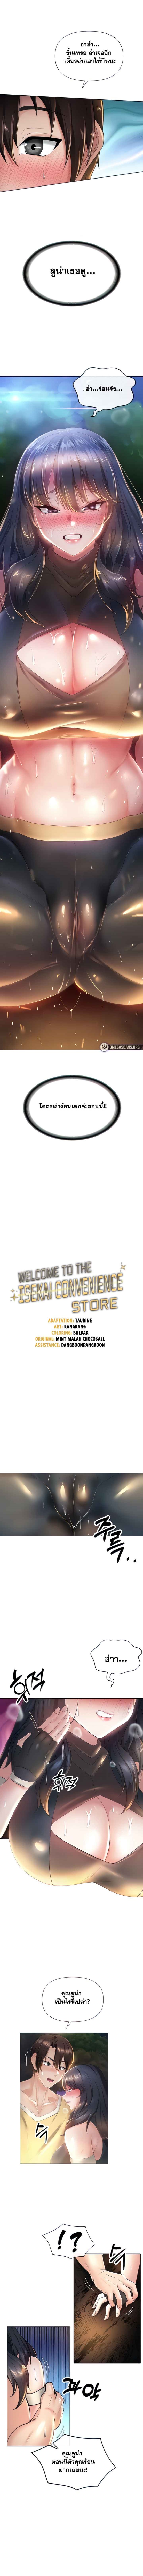 Welcome to the Isekai Convenience Store 6 (1)